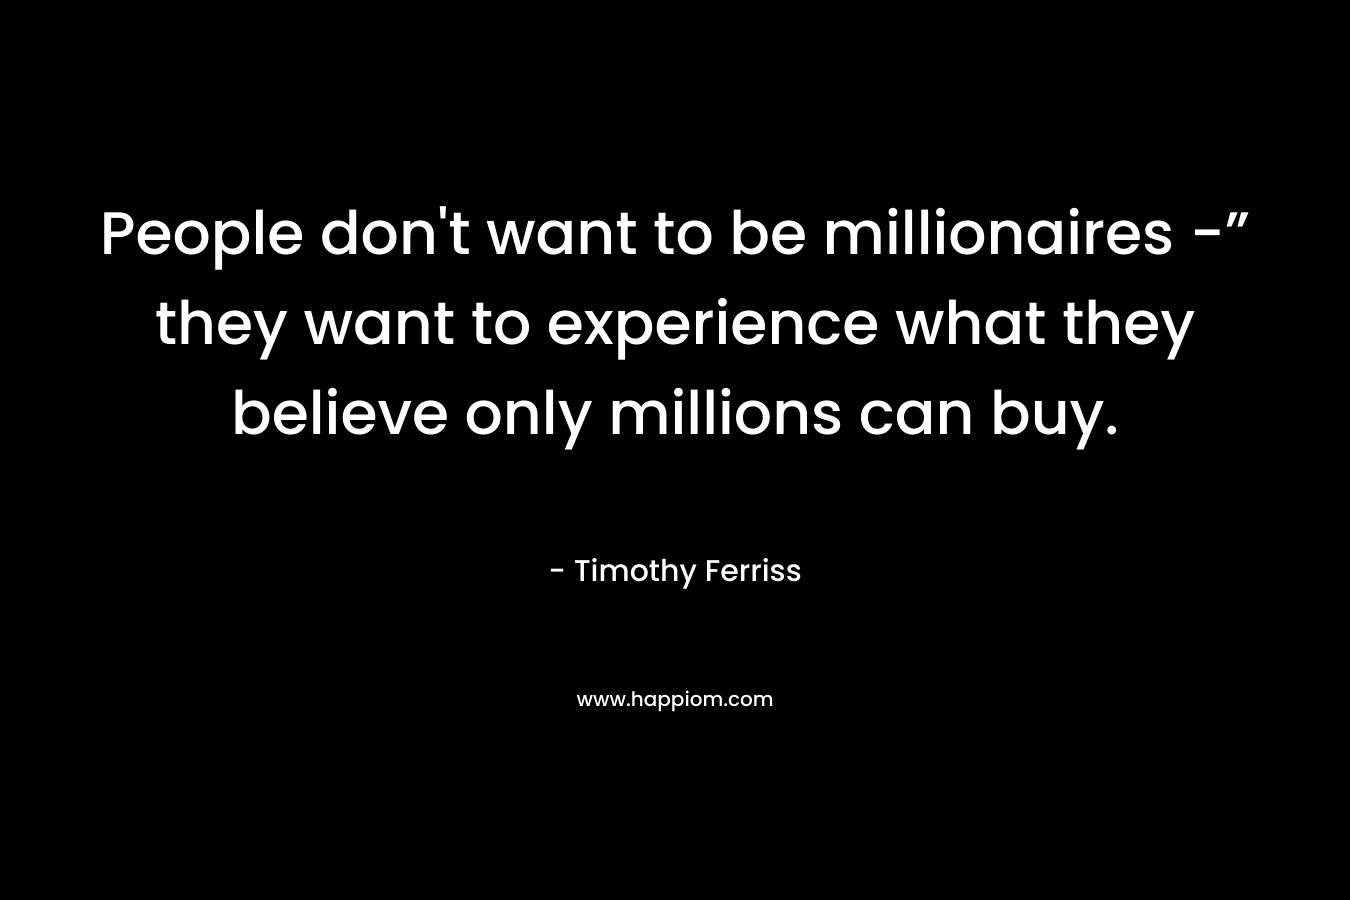 People don't want to be millionaires -” they want to experience what they believe only millions can buy.